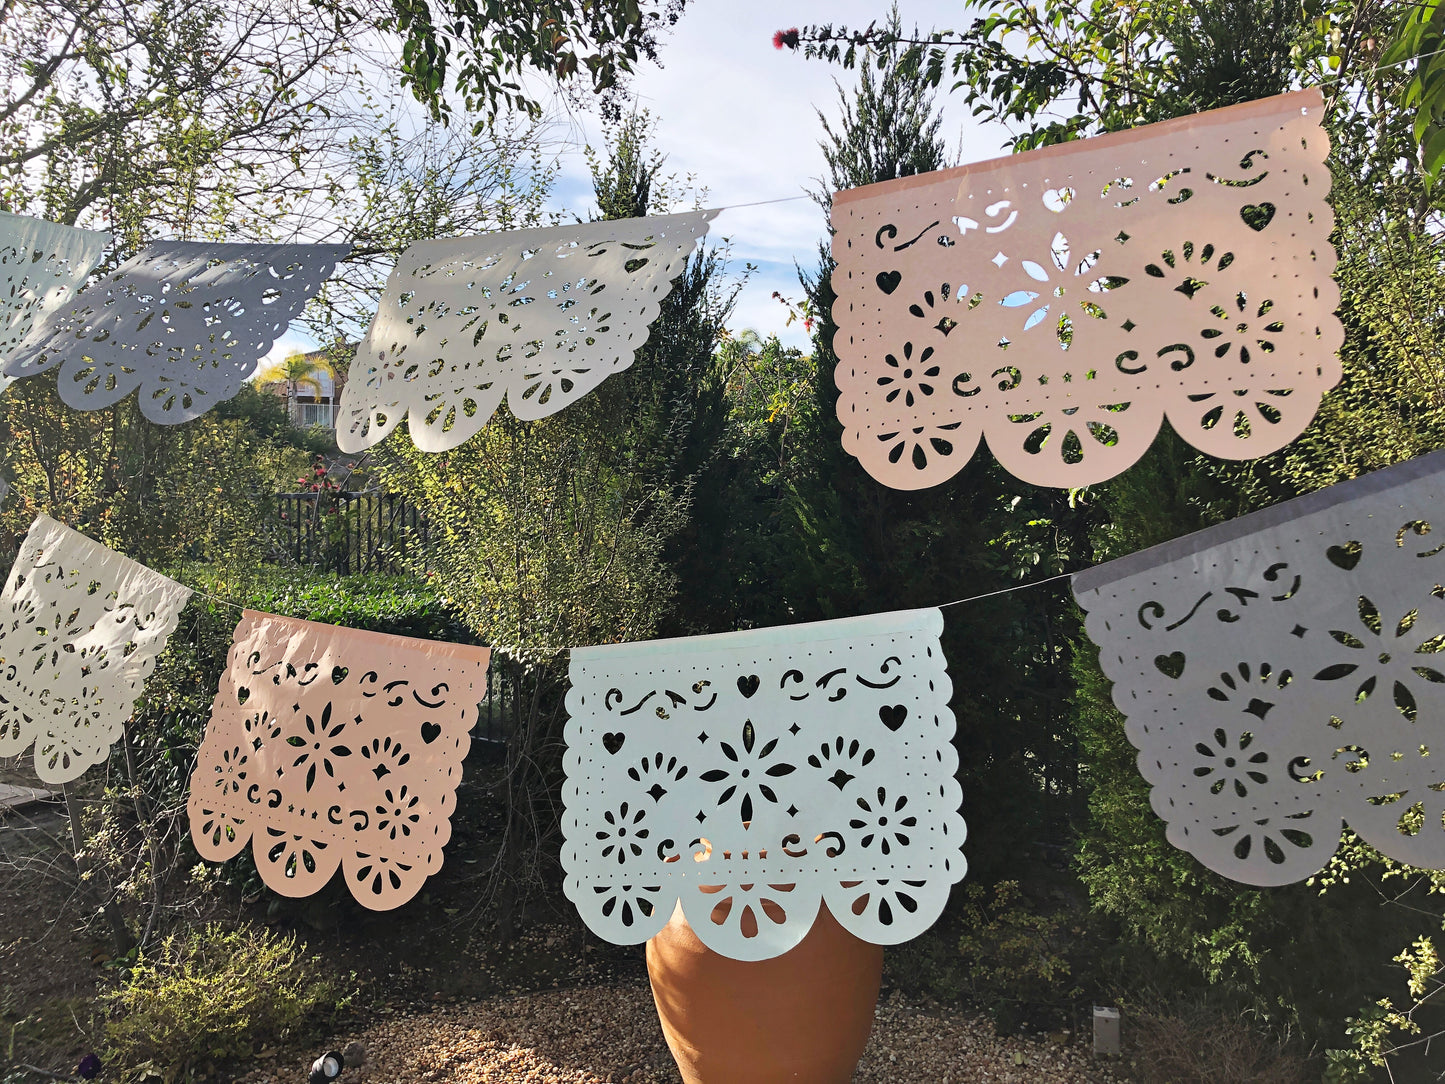 Papel Picado banner - muted pastel colors